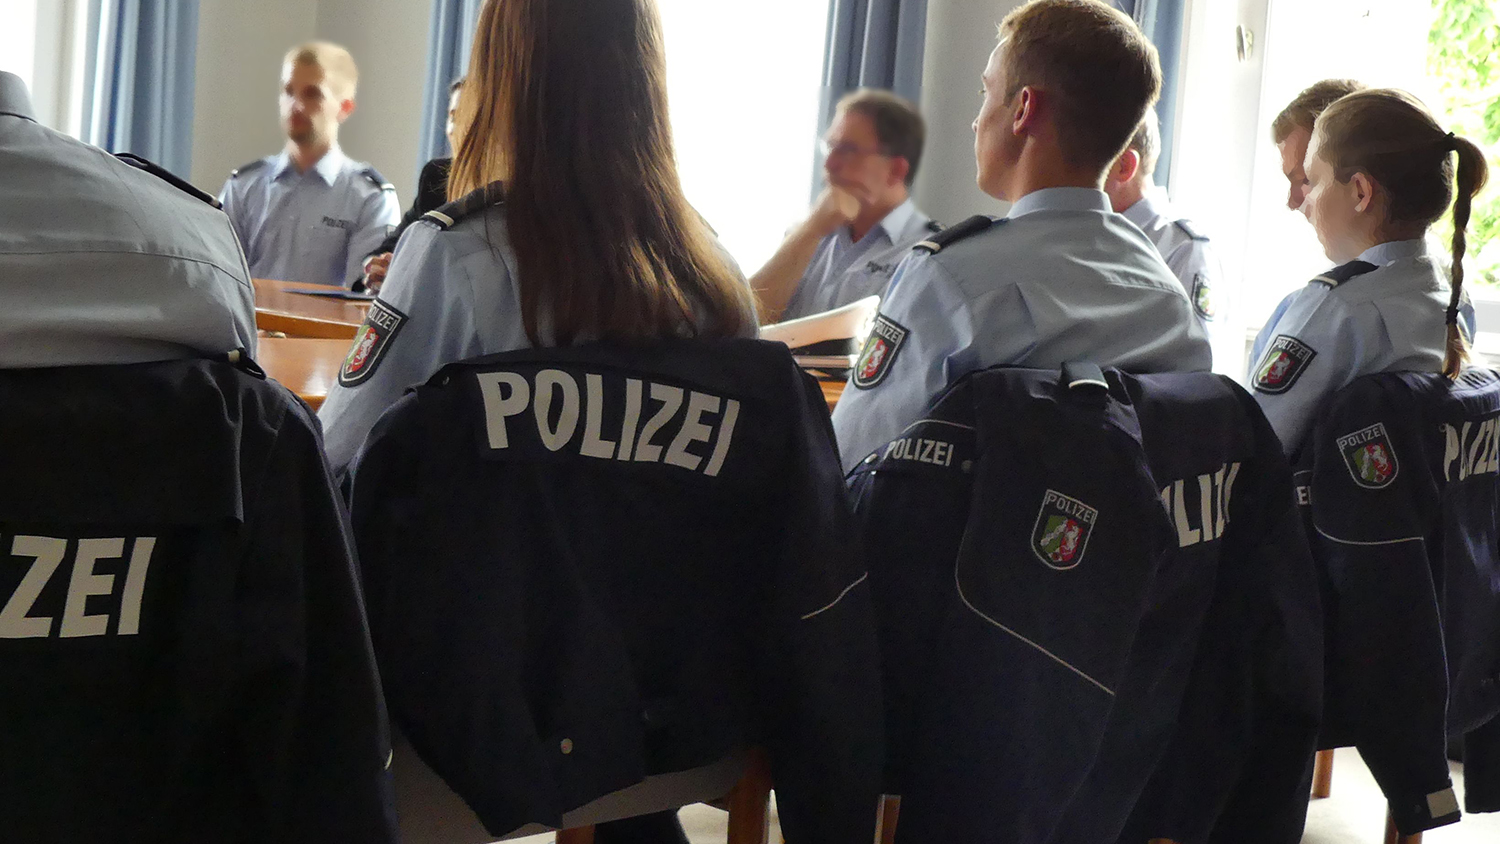 Young commissioner applicants at the Soest district police authority